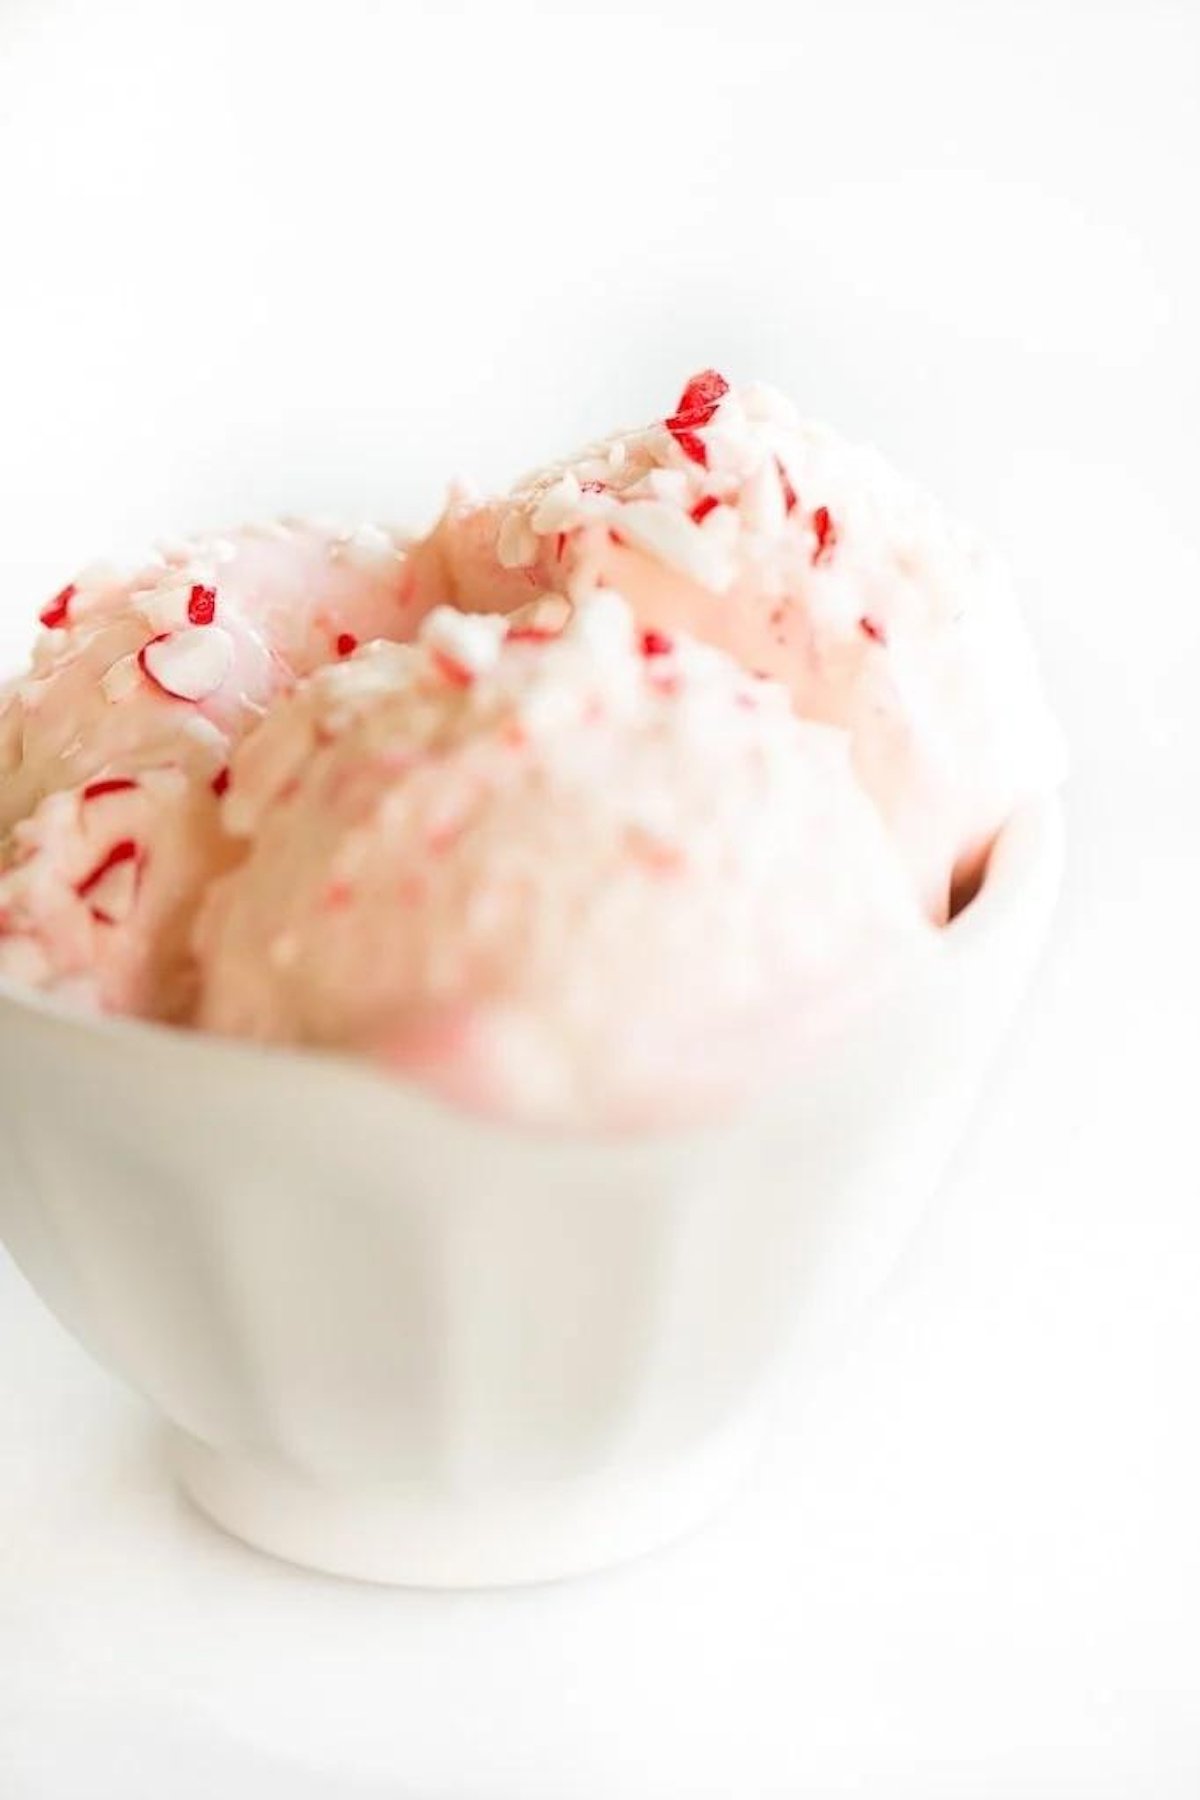 Peppermint stick ice cream in a white bowl.